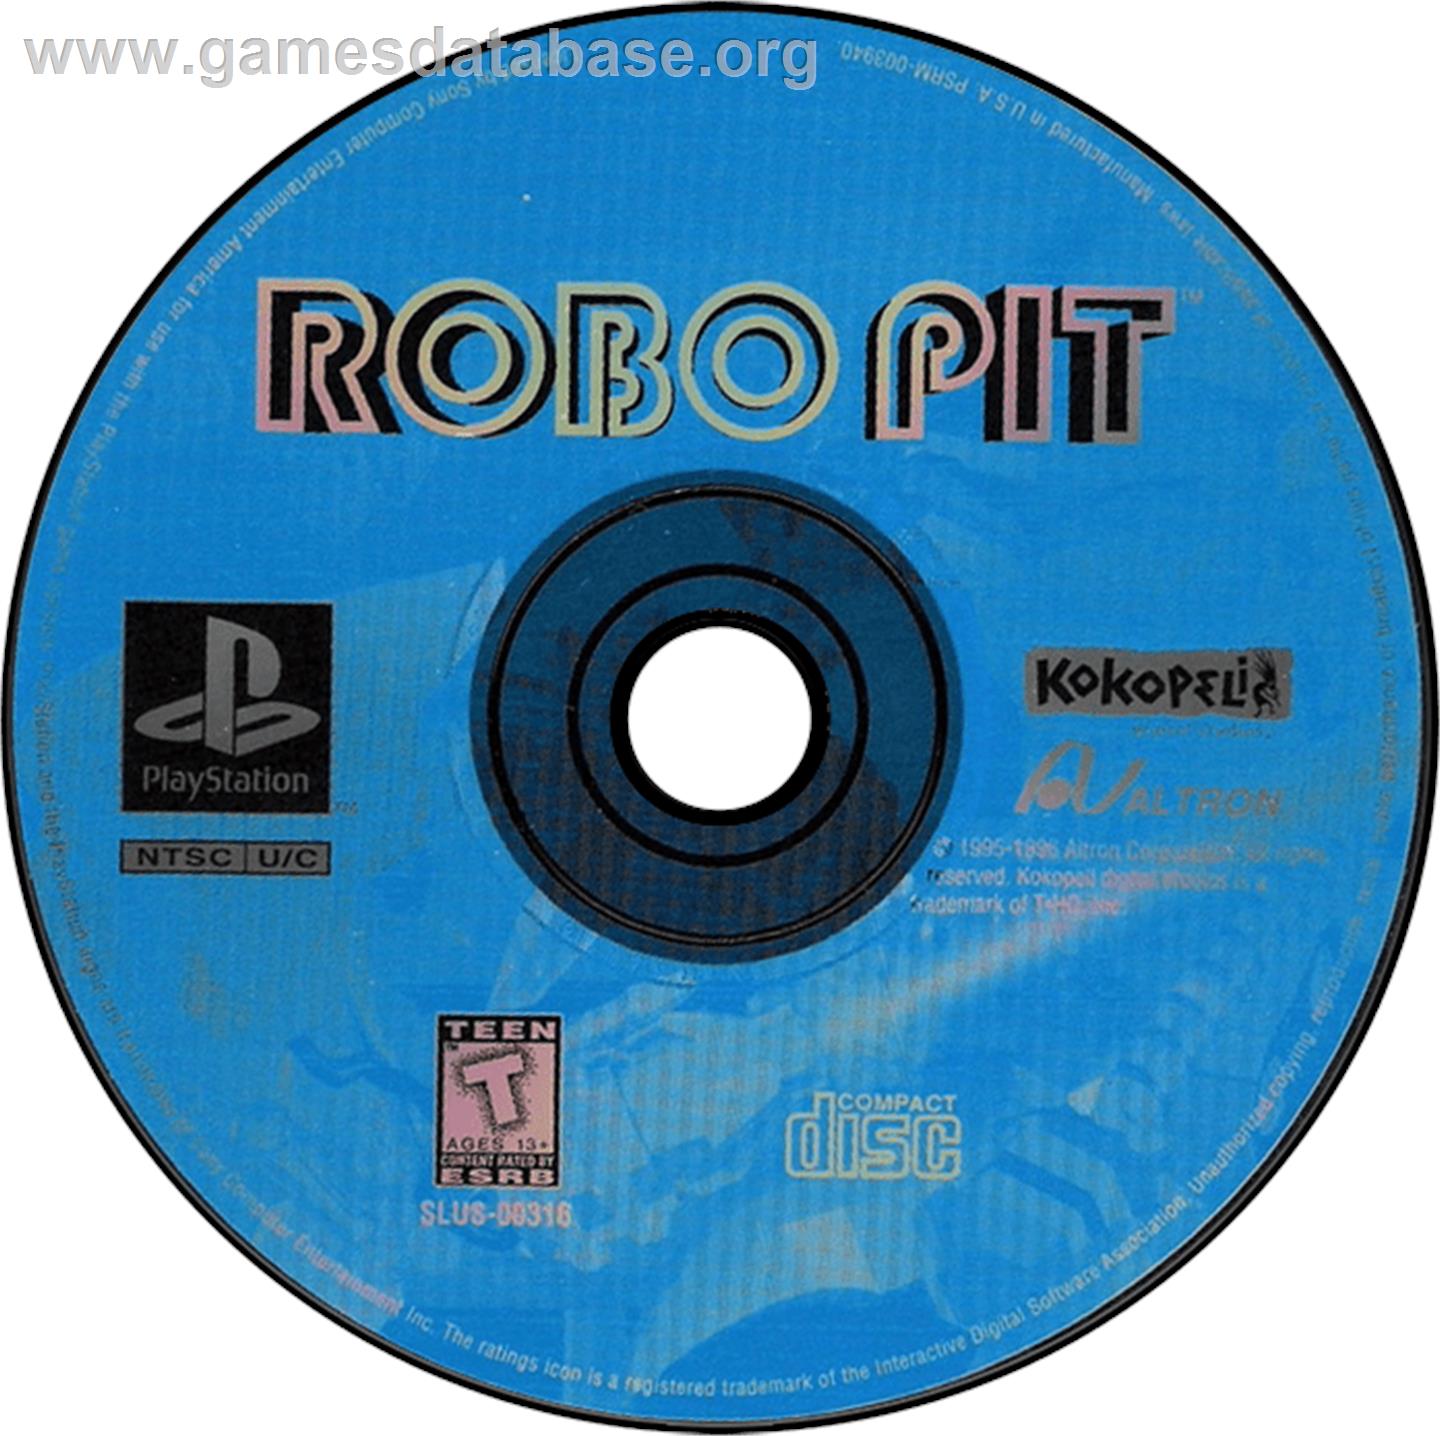 Robo Pit - Sony Playstation - Artwork - Disc